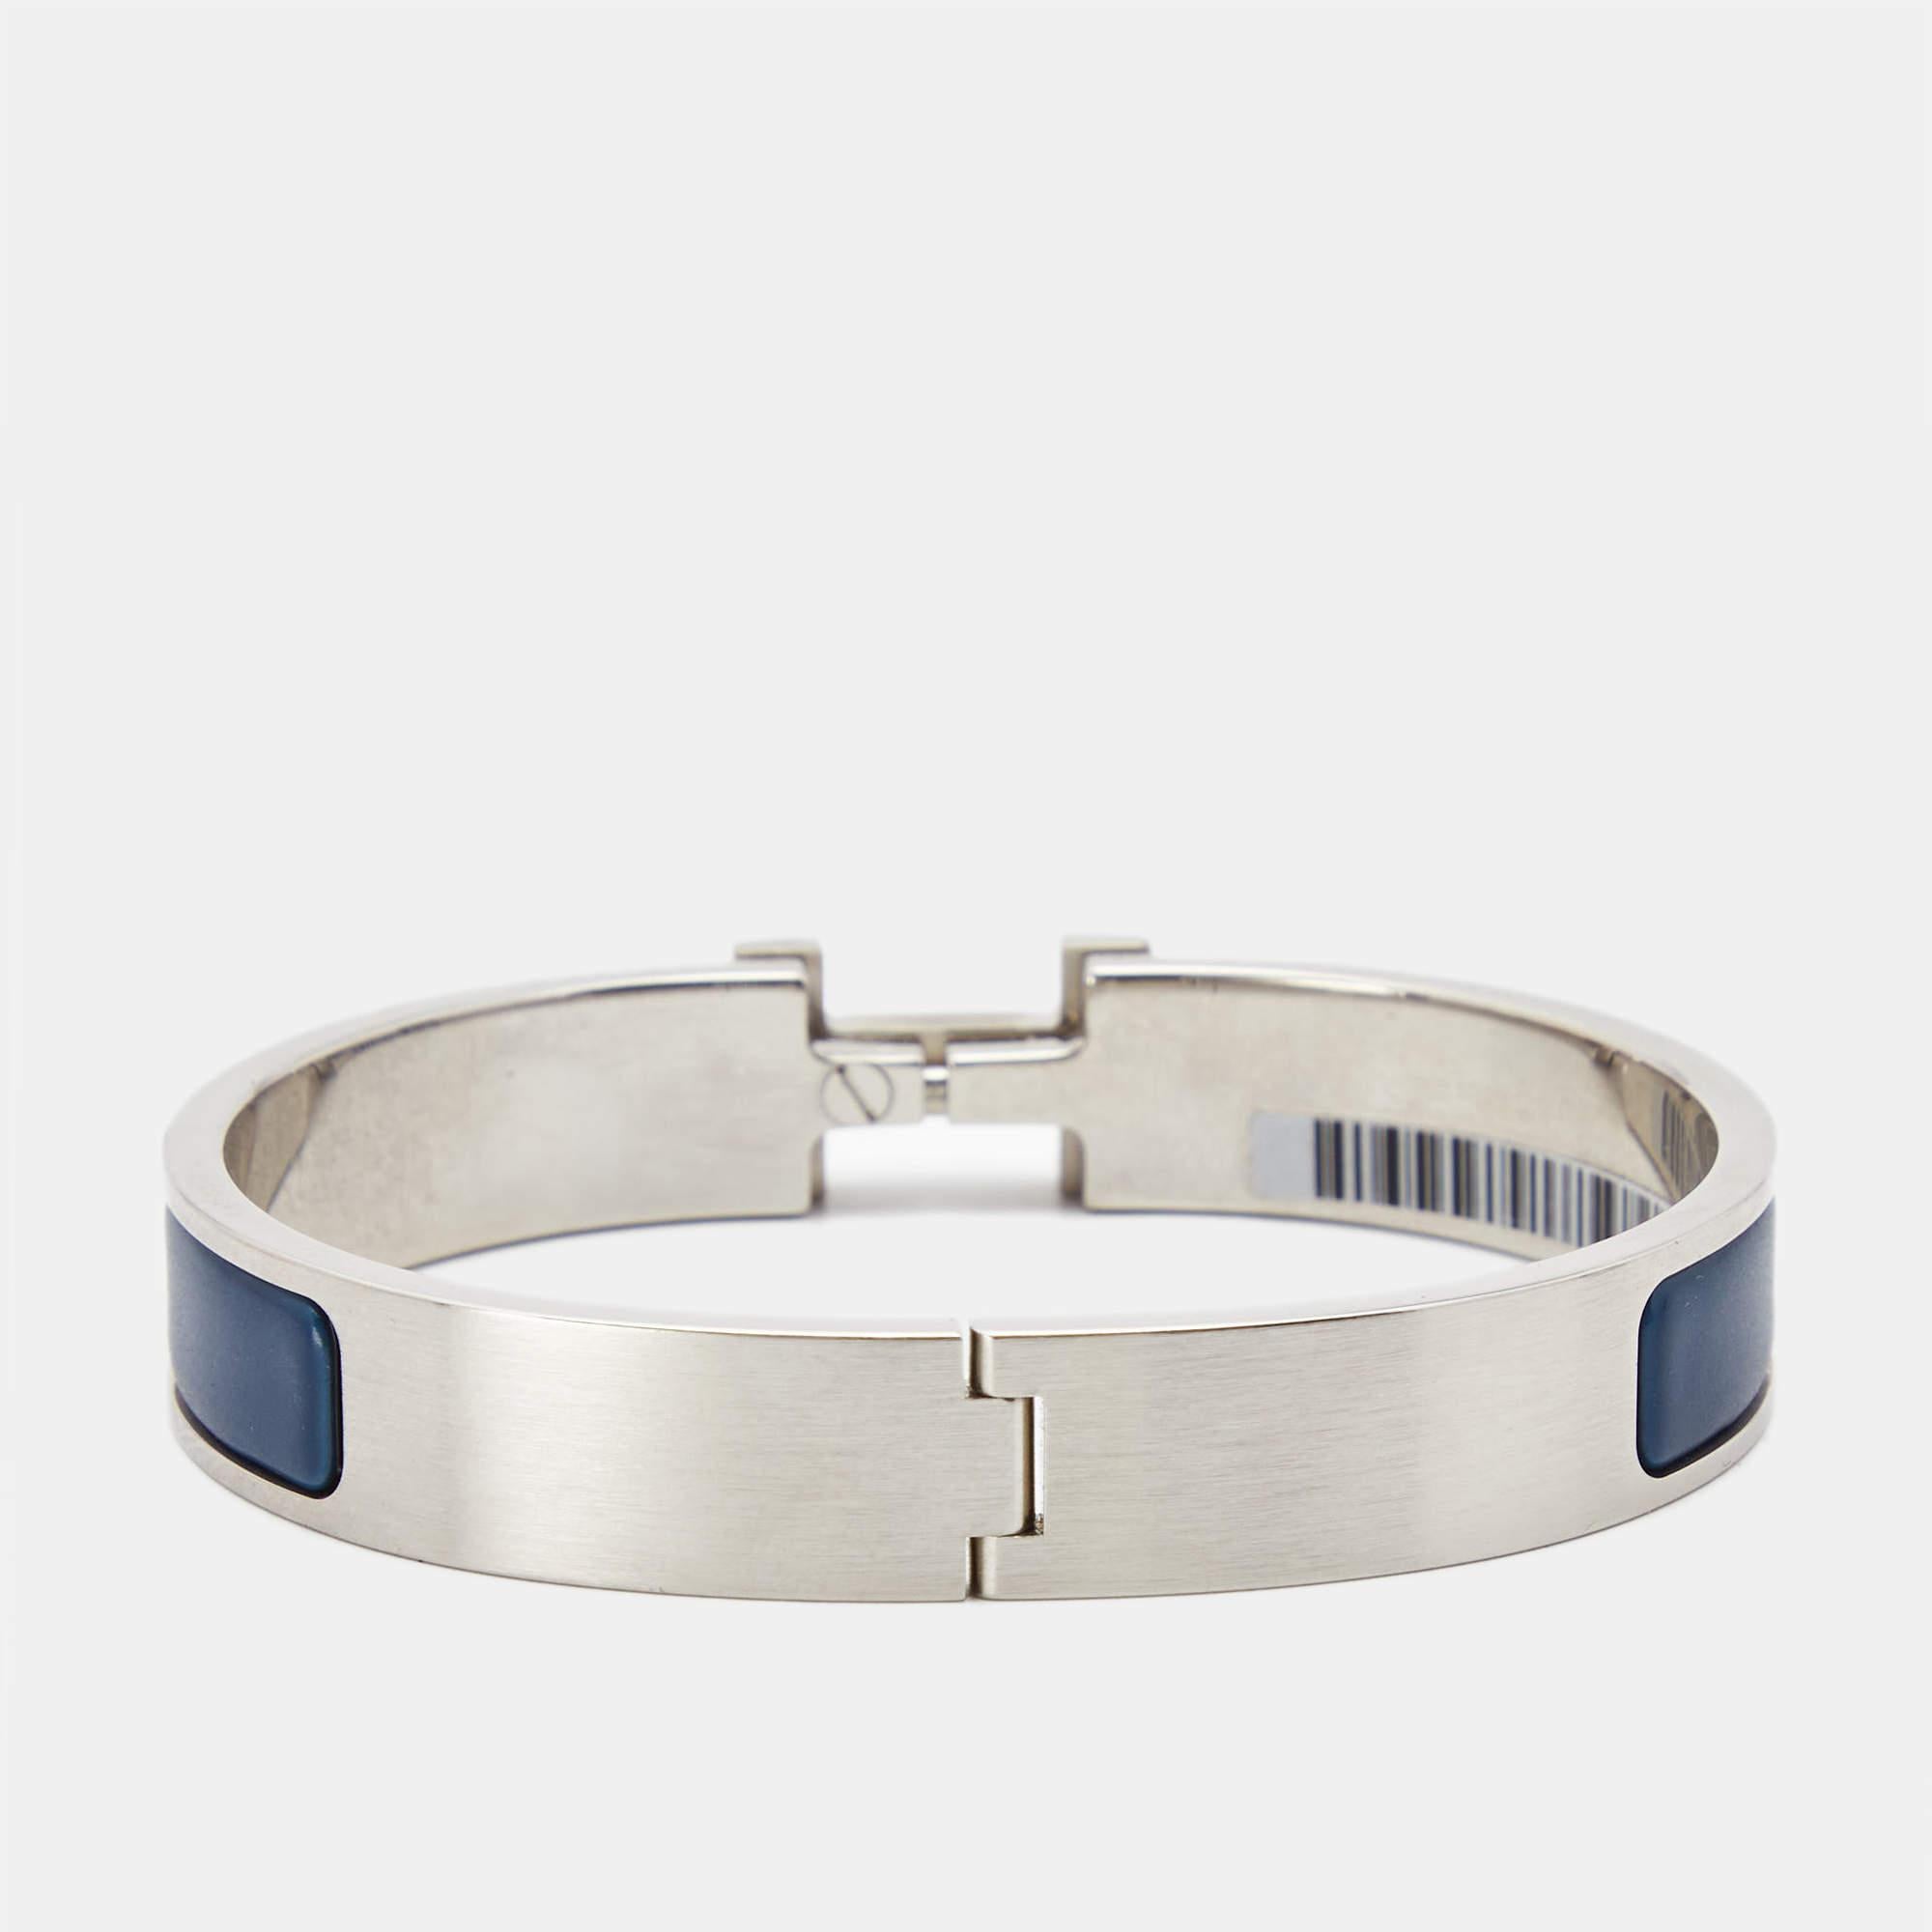 Adorn your wrist with this stunner of a bracelet from Hermes. The piece is from their Clic H collection, and it has been crafted from palladium-plated metal and designed with blue enamel. This bracelet is complete with the iconic H to the front. Get